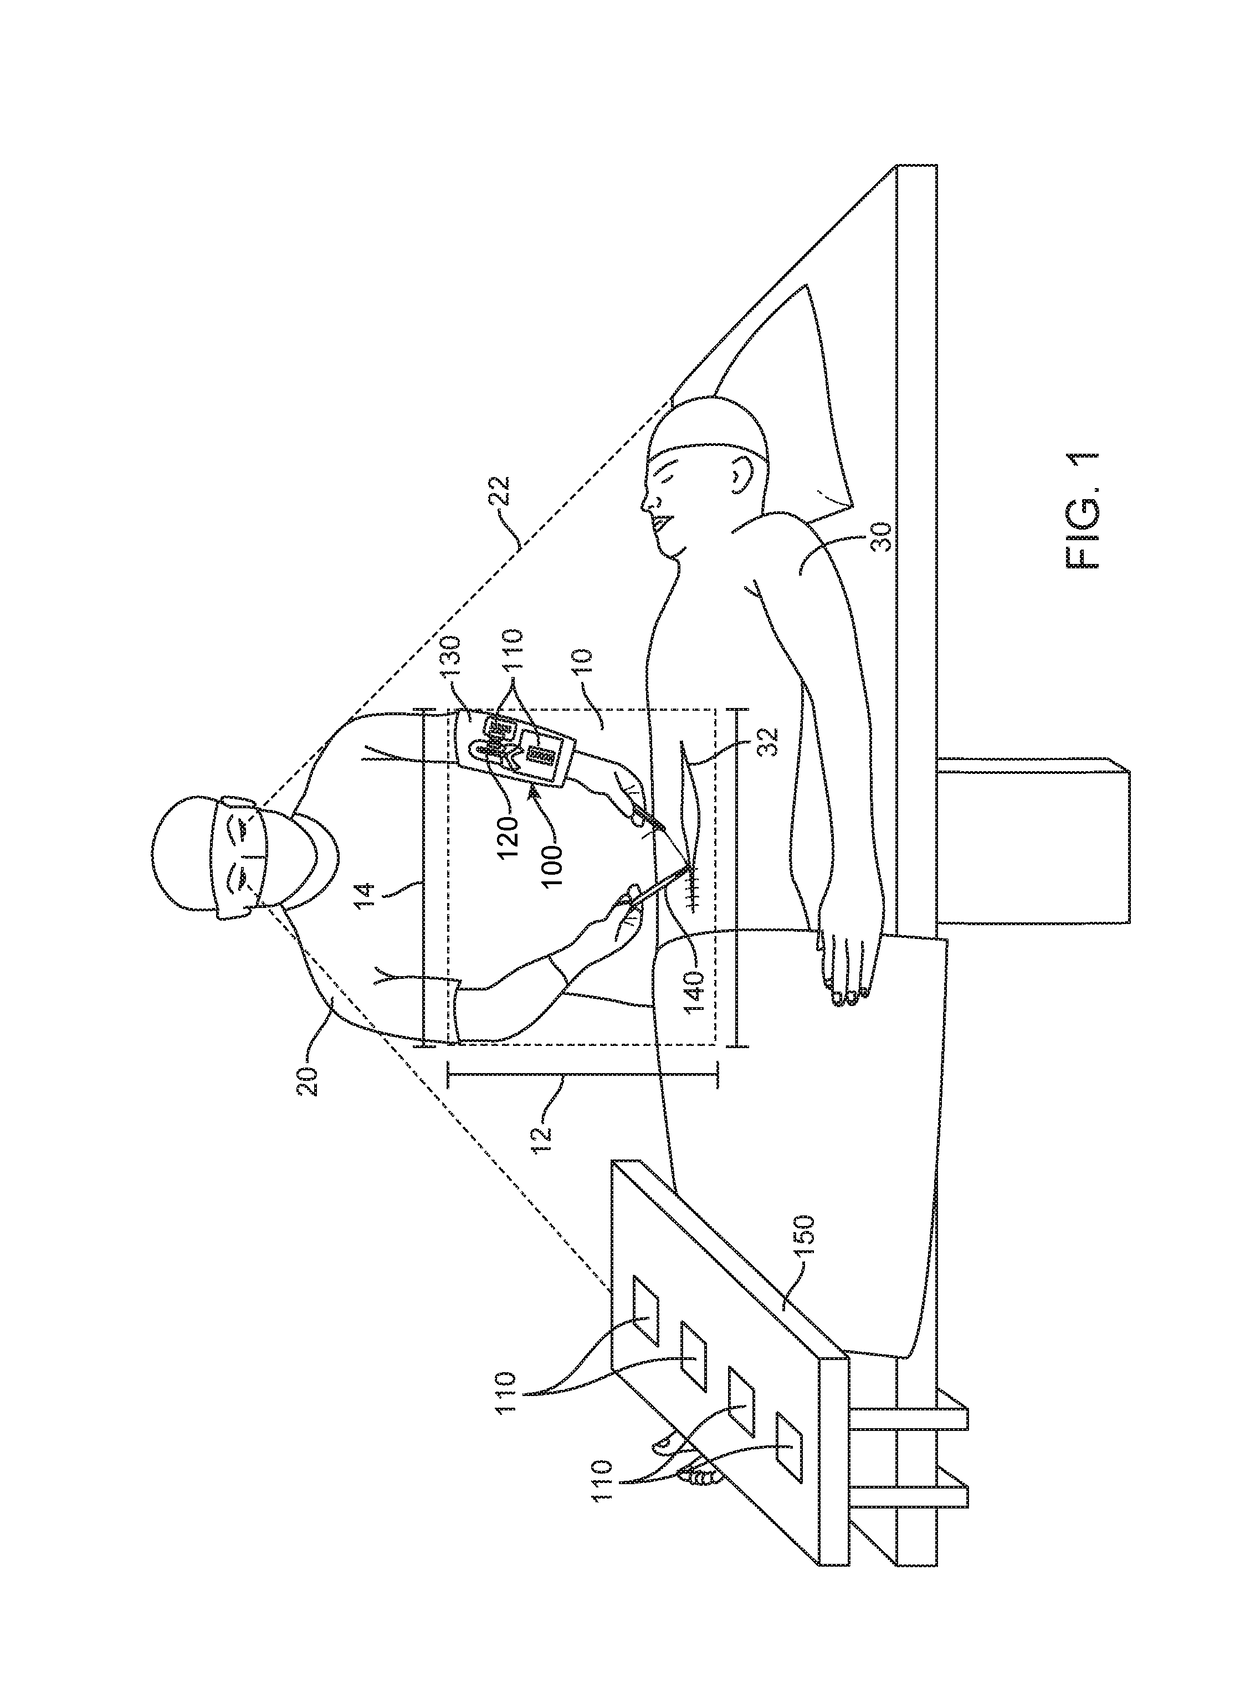 Systems and methods for data capture in an operating room